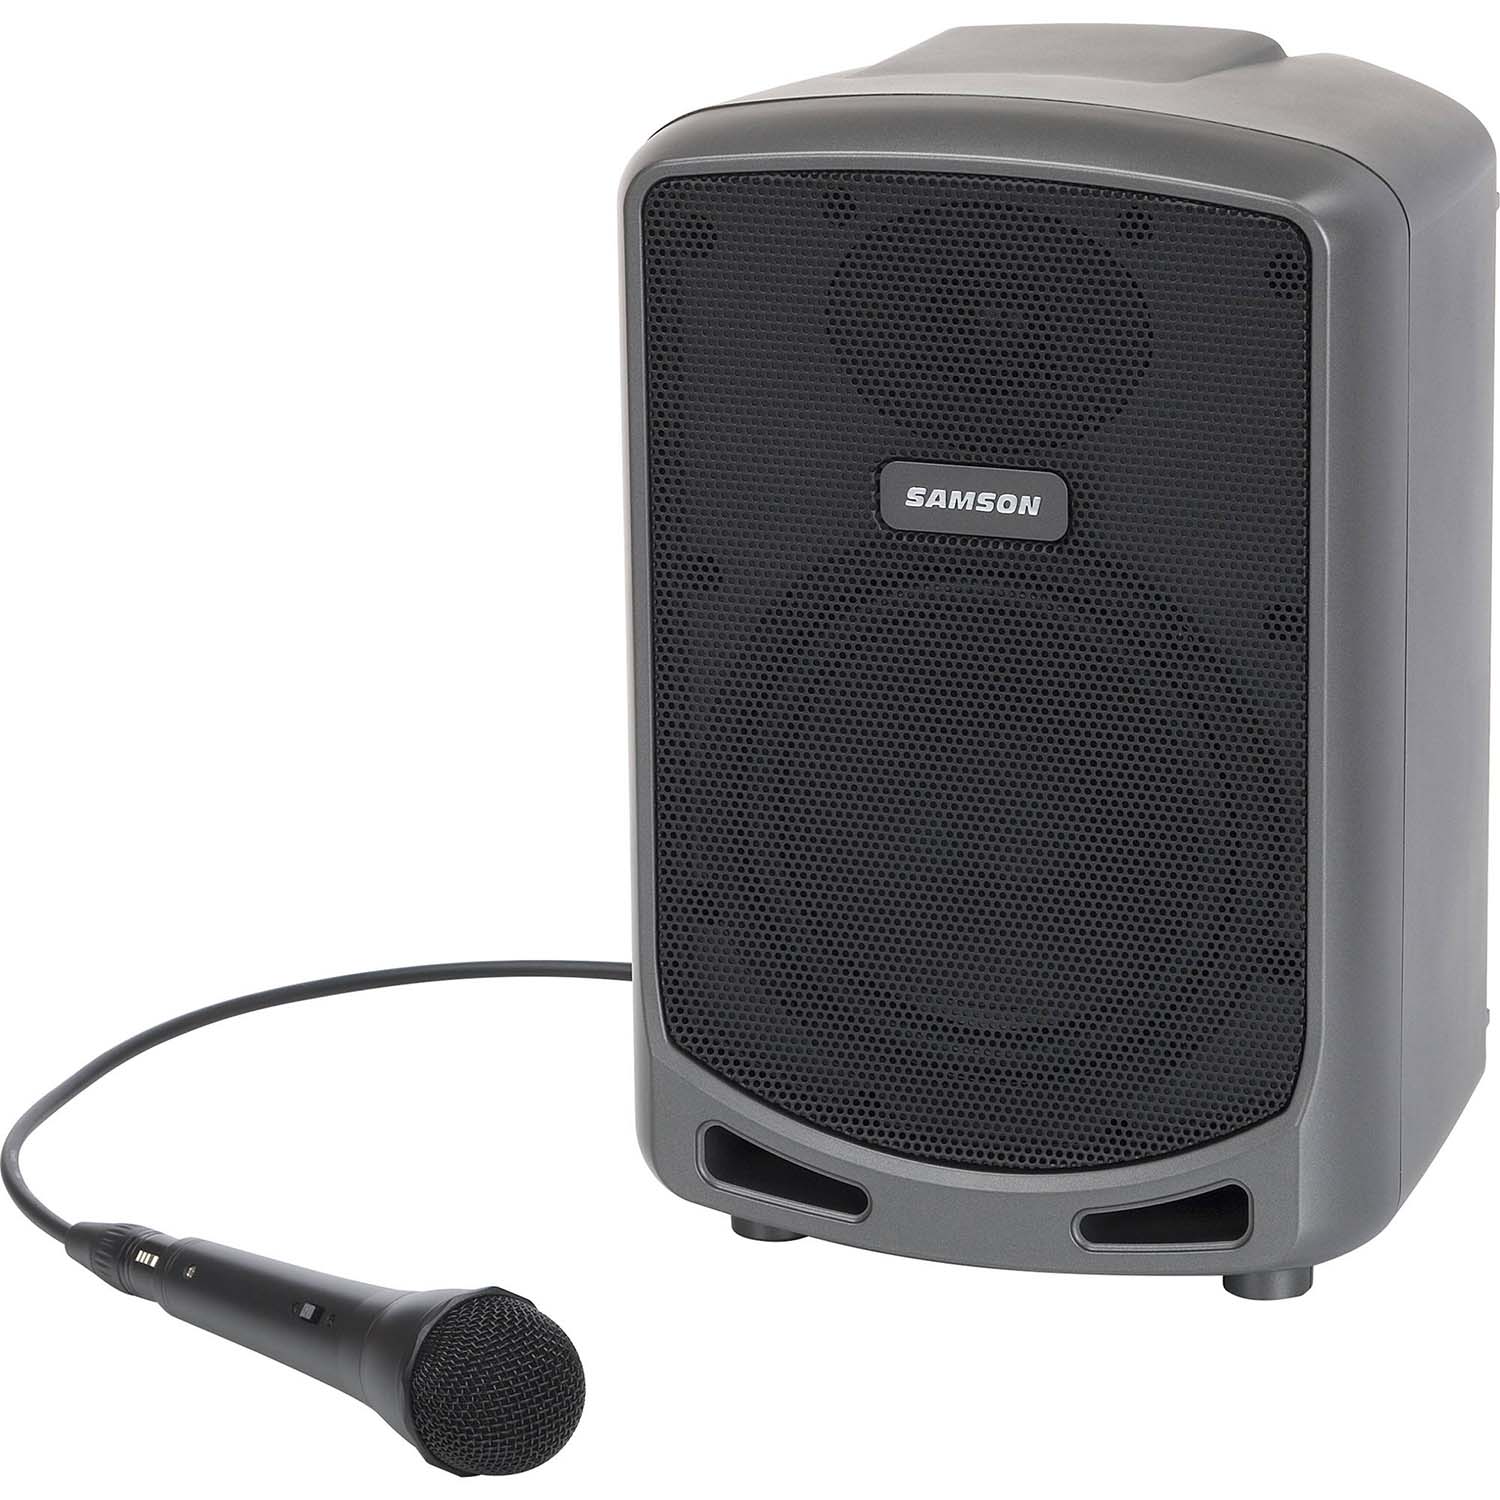 Samson SAXPEXPP Expedition Express+ 2-Way 75W Portable PA System with Wired Microphone - Hollywood DJ